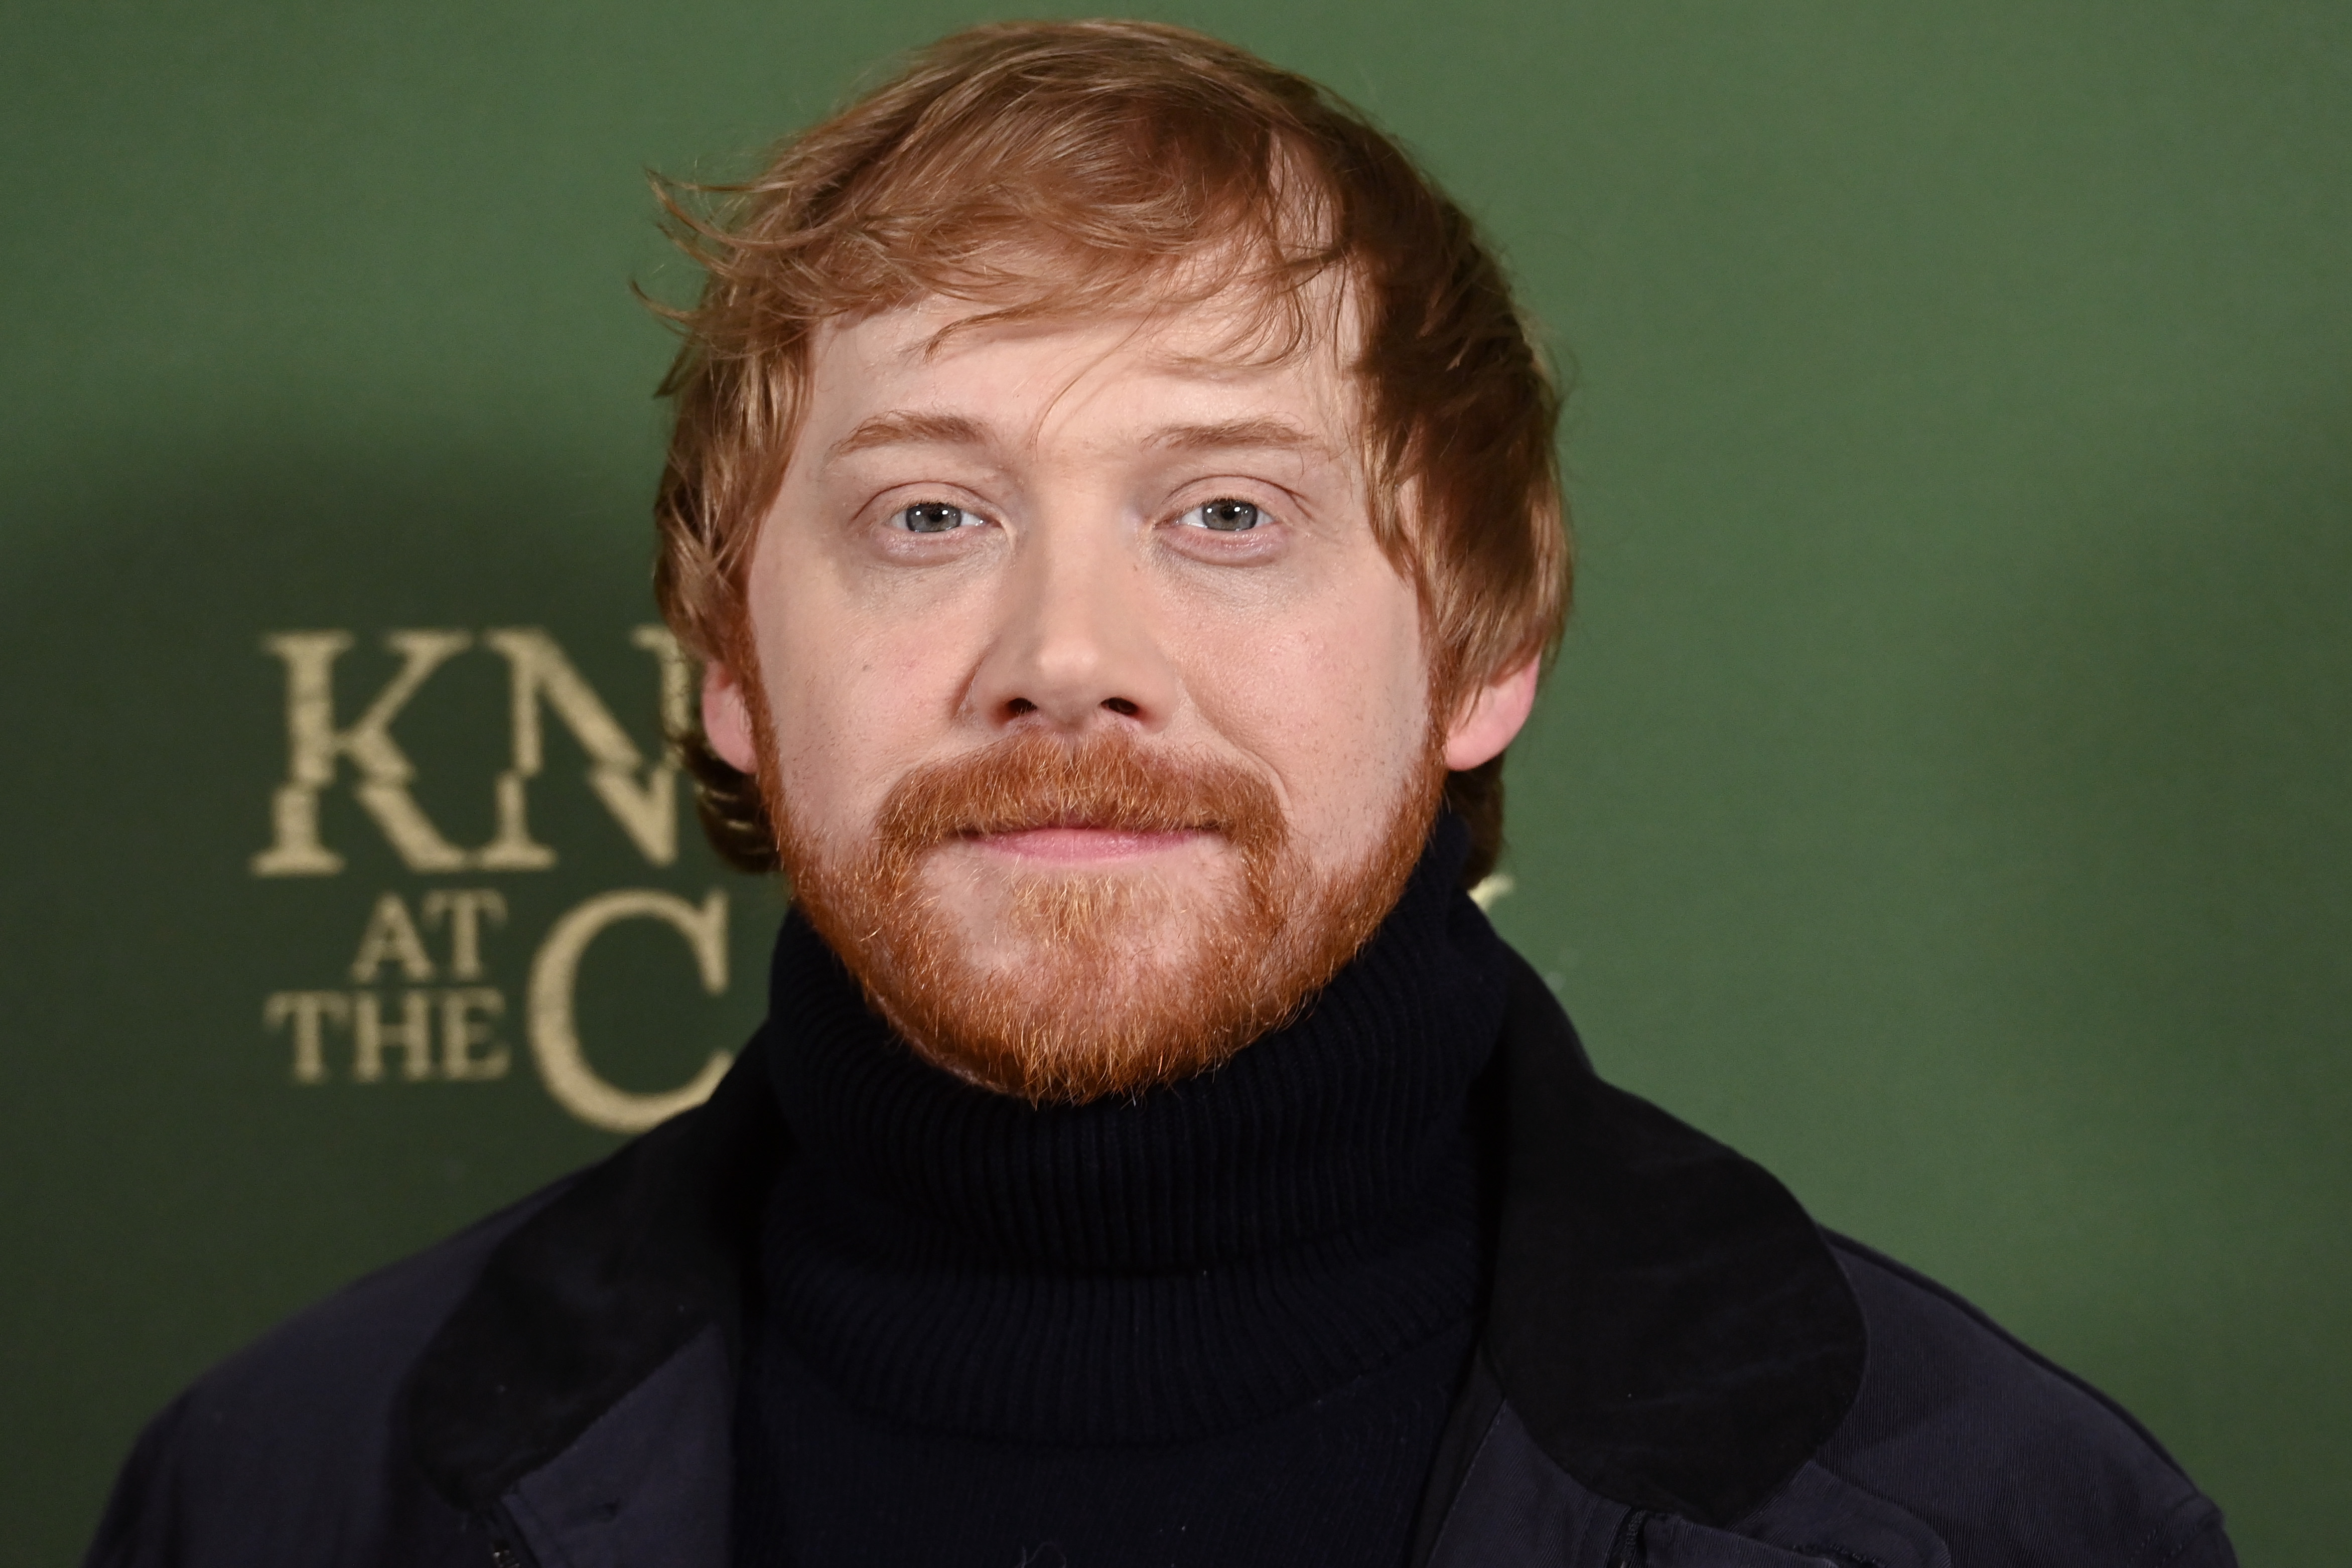 Rupert Grint at the special screening of "Knock at the Cabin" in London, England on January 25, 2023 | Source: Getty Images